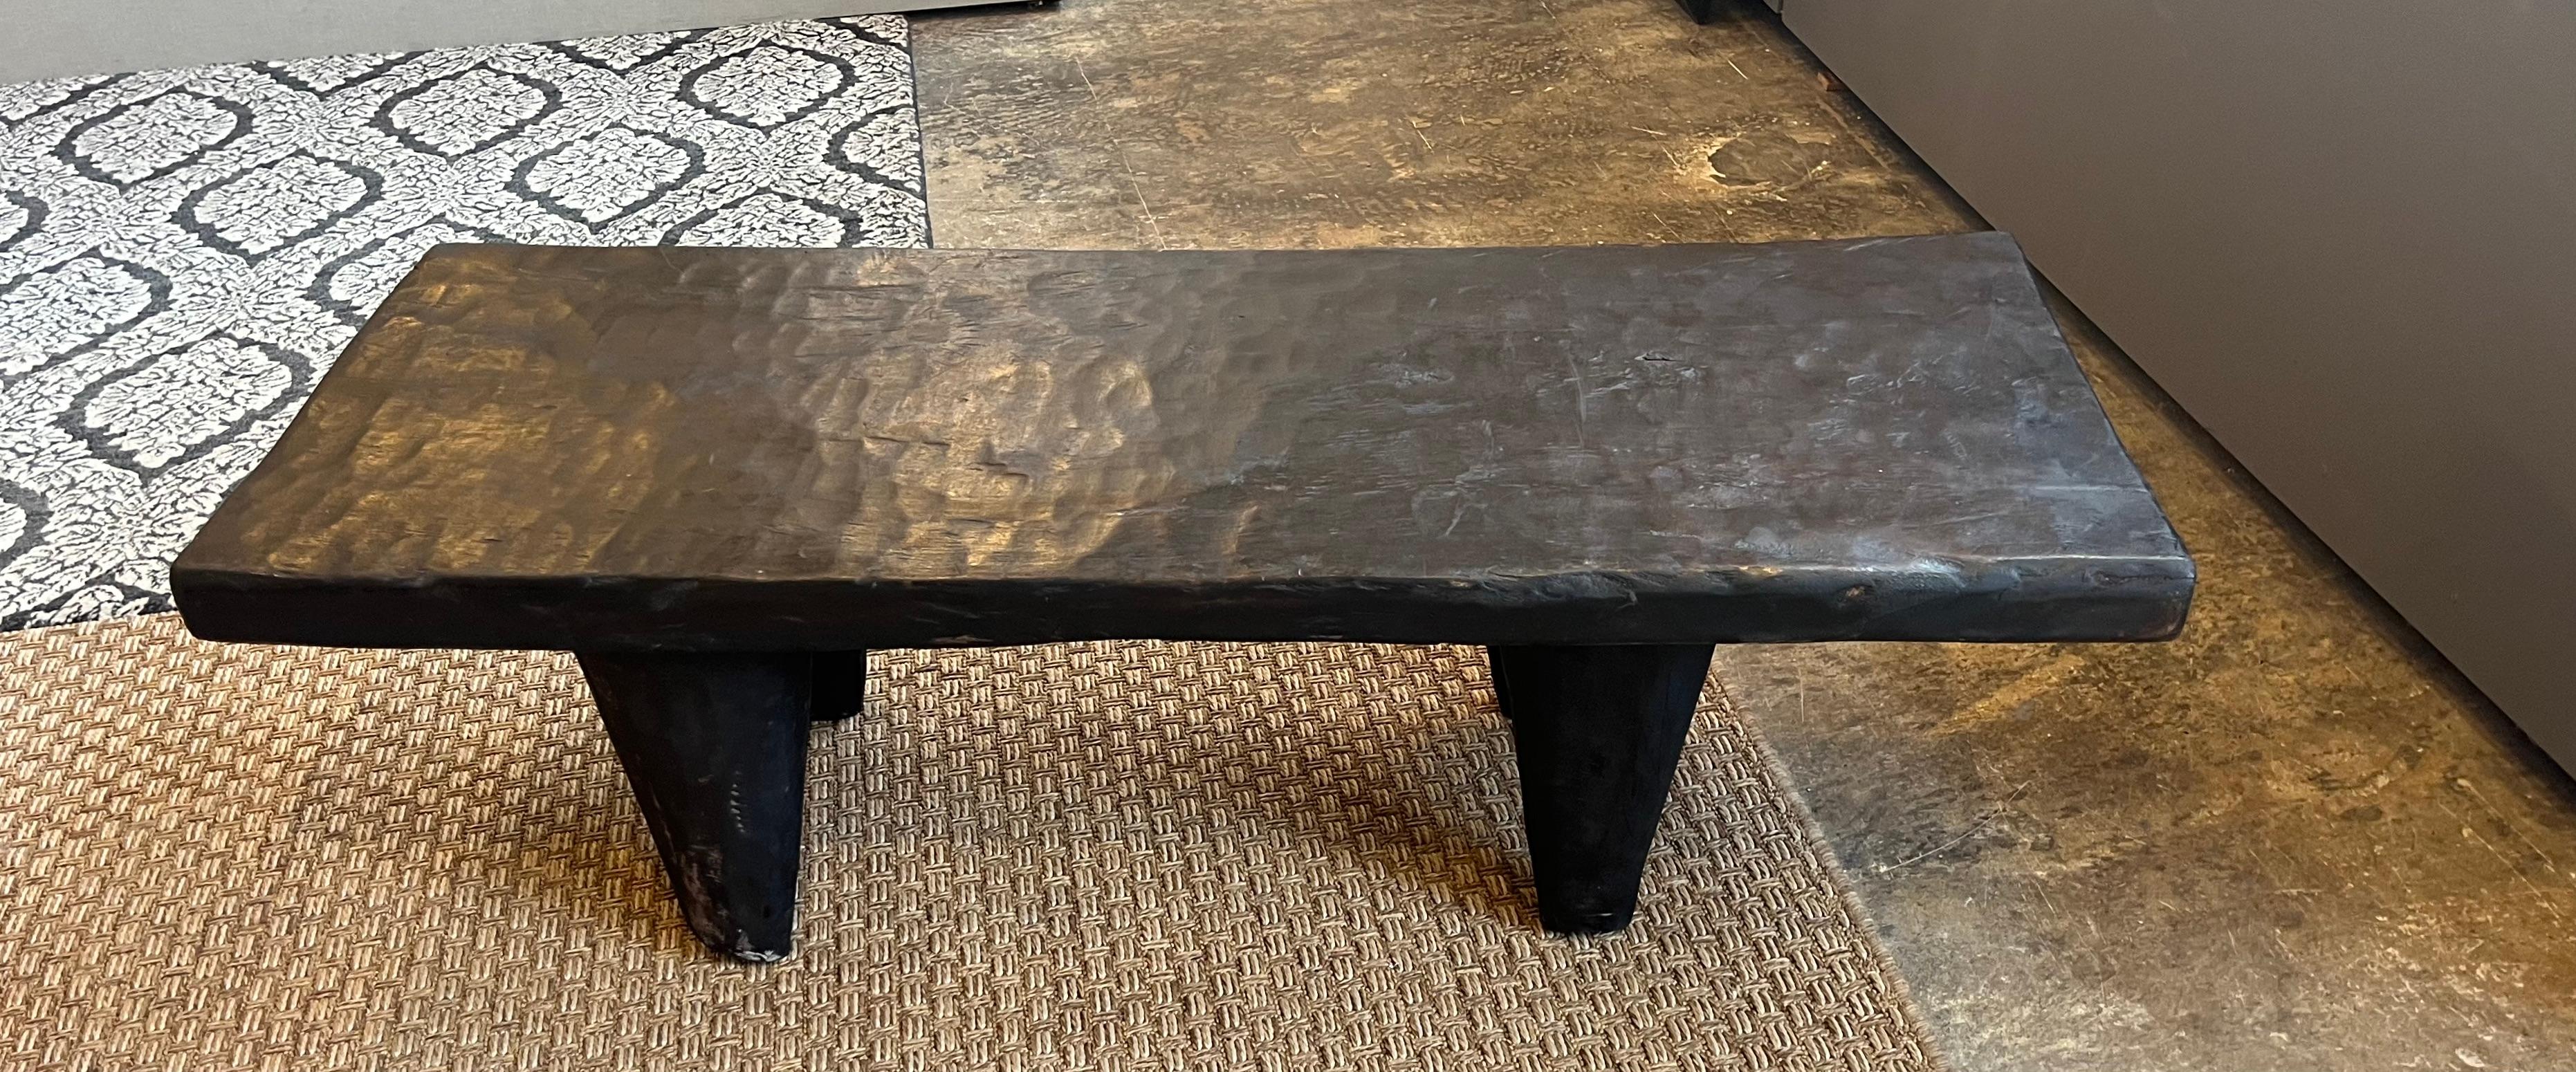 A hand carved Iroko wood low table or bench from the Ivory Coast of Africa. This table was carved from a single piece of wood.The presentation results in a rustic but elegant table.